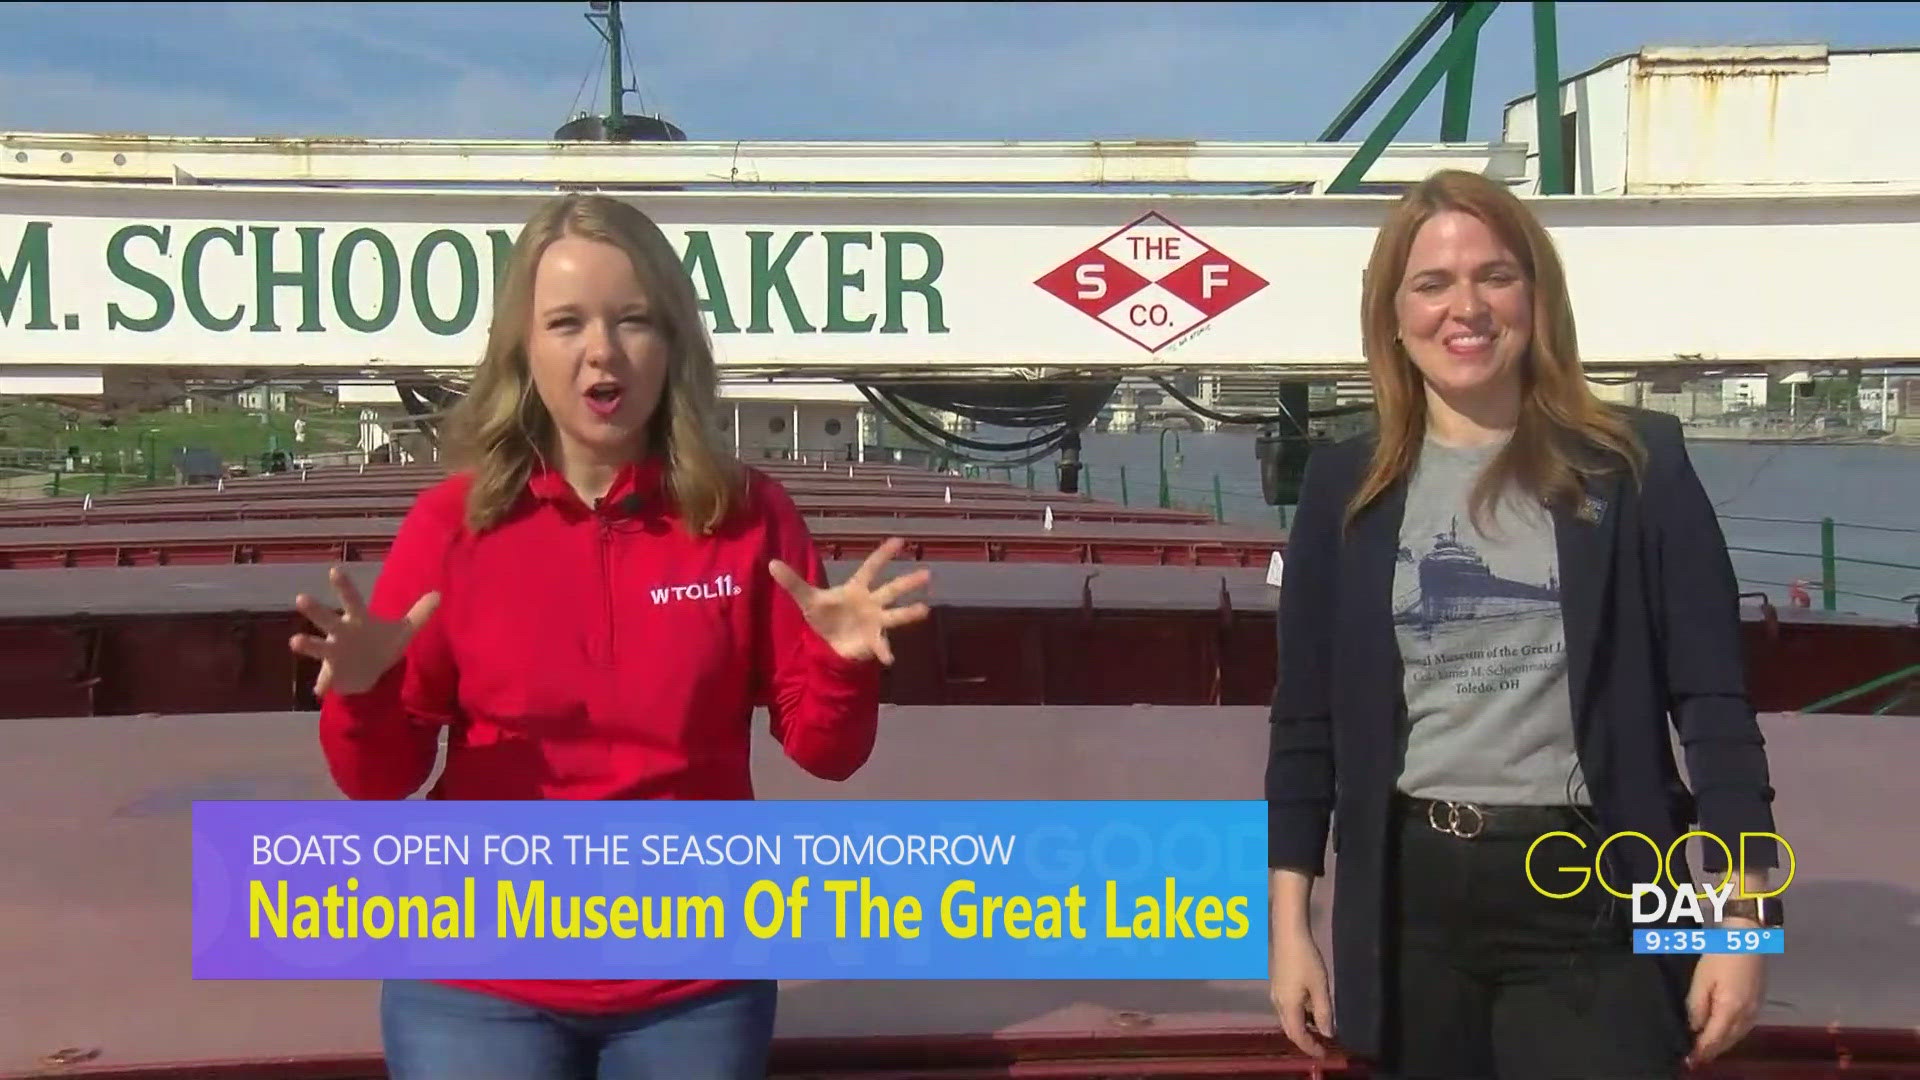 The boat tours to explore the National Museum Of The Great Lakes officially open for the season on May 1.